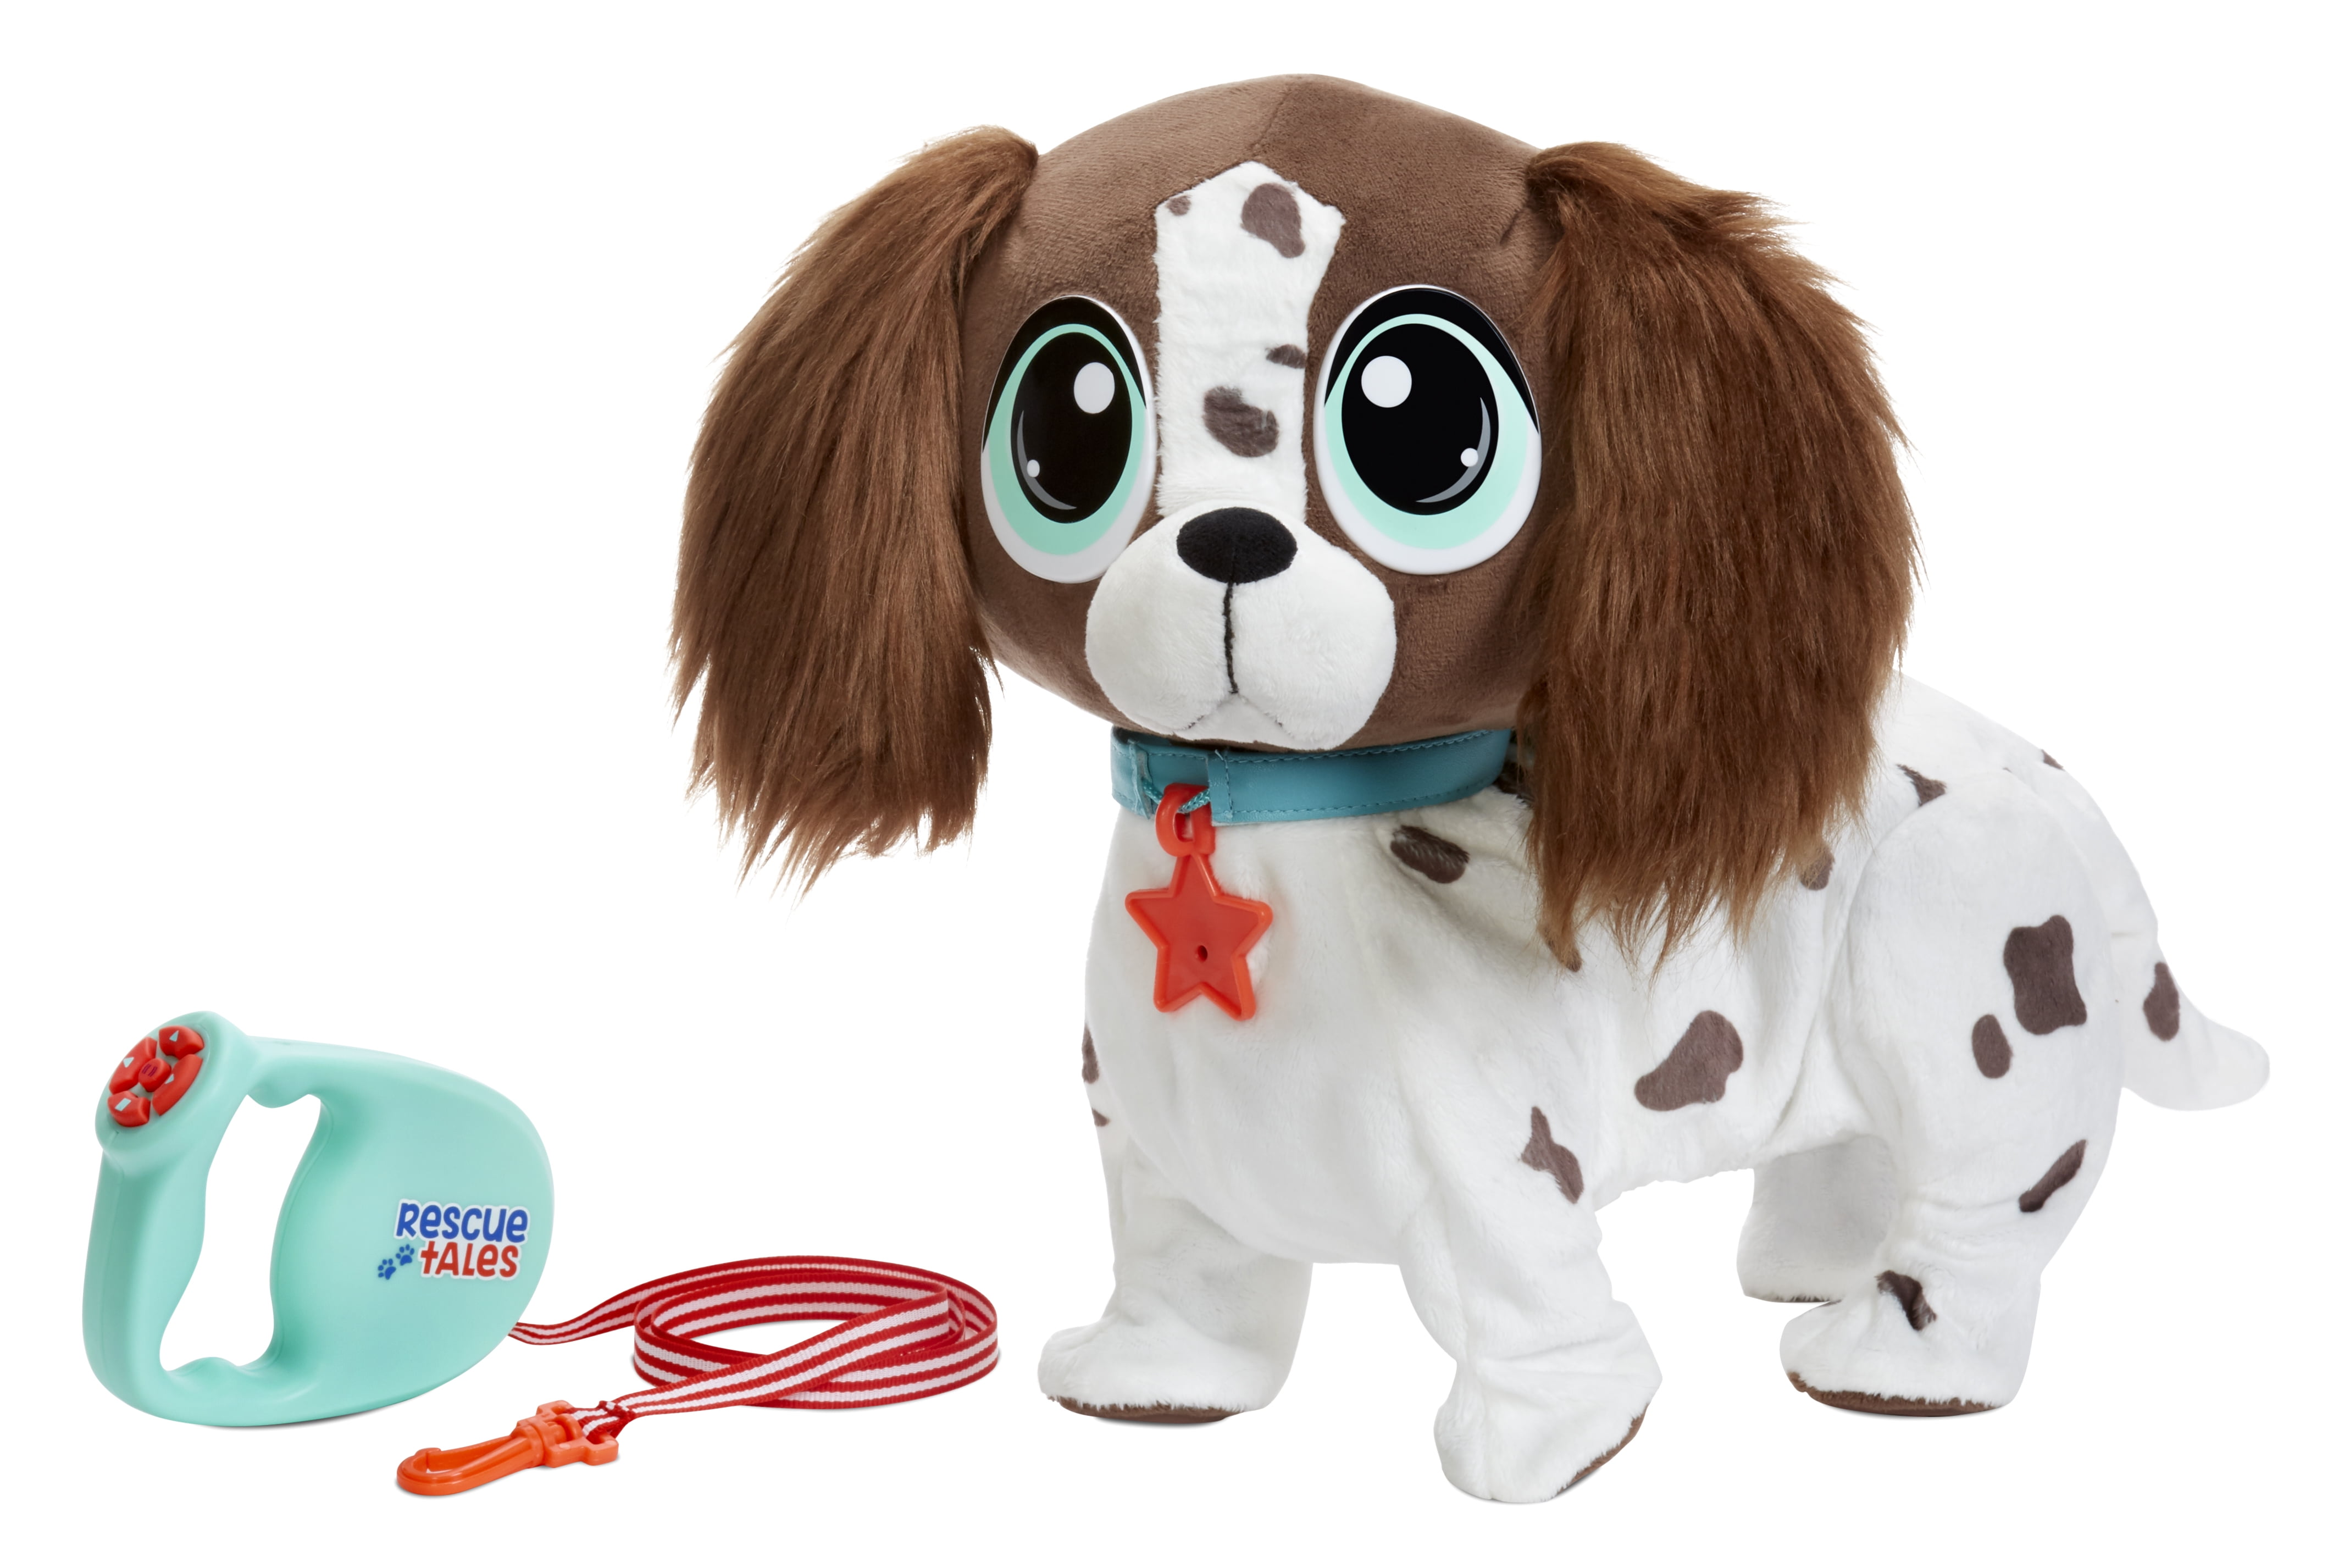 Pound Puppies Puppy & Carrier Cockapoodle Mini Adoptable Plush Toy Dog Stuffed 